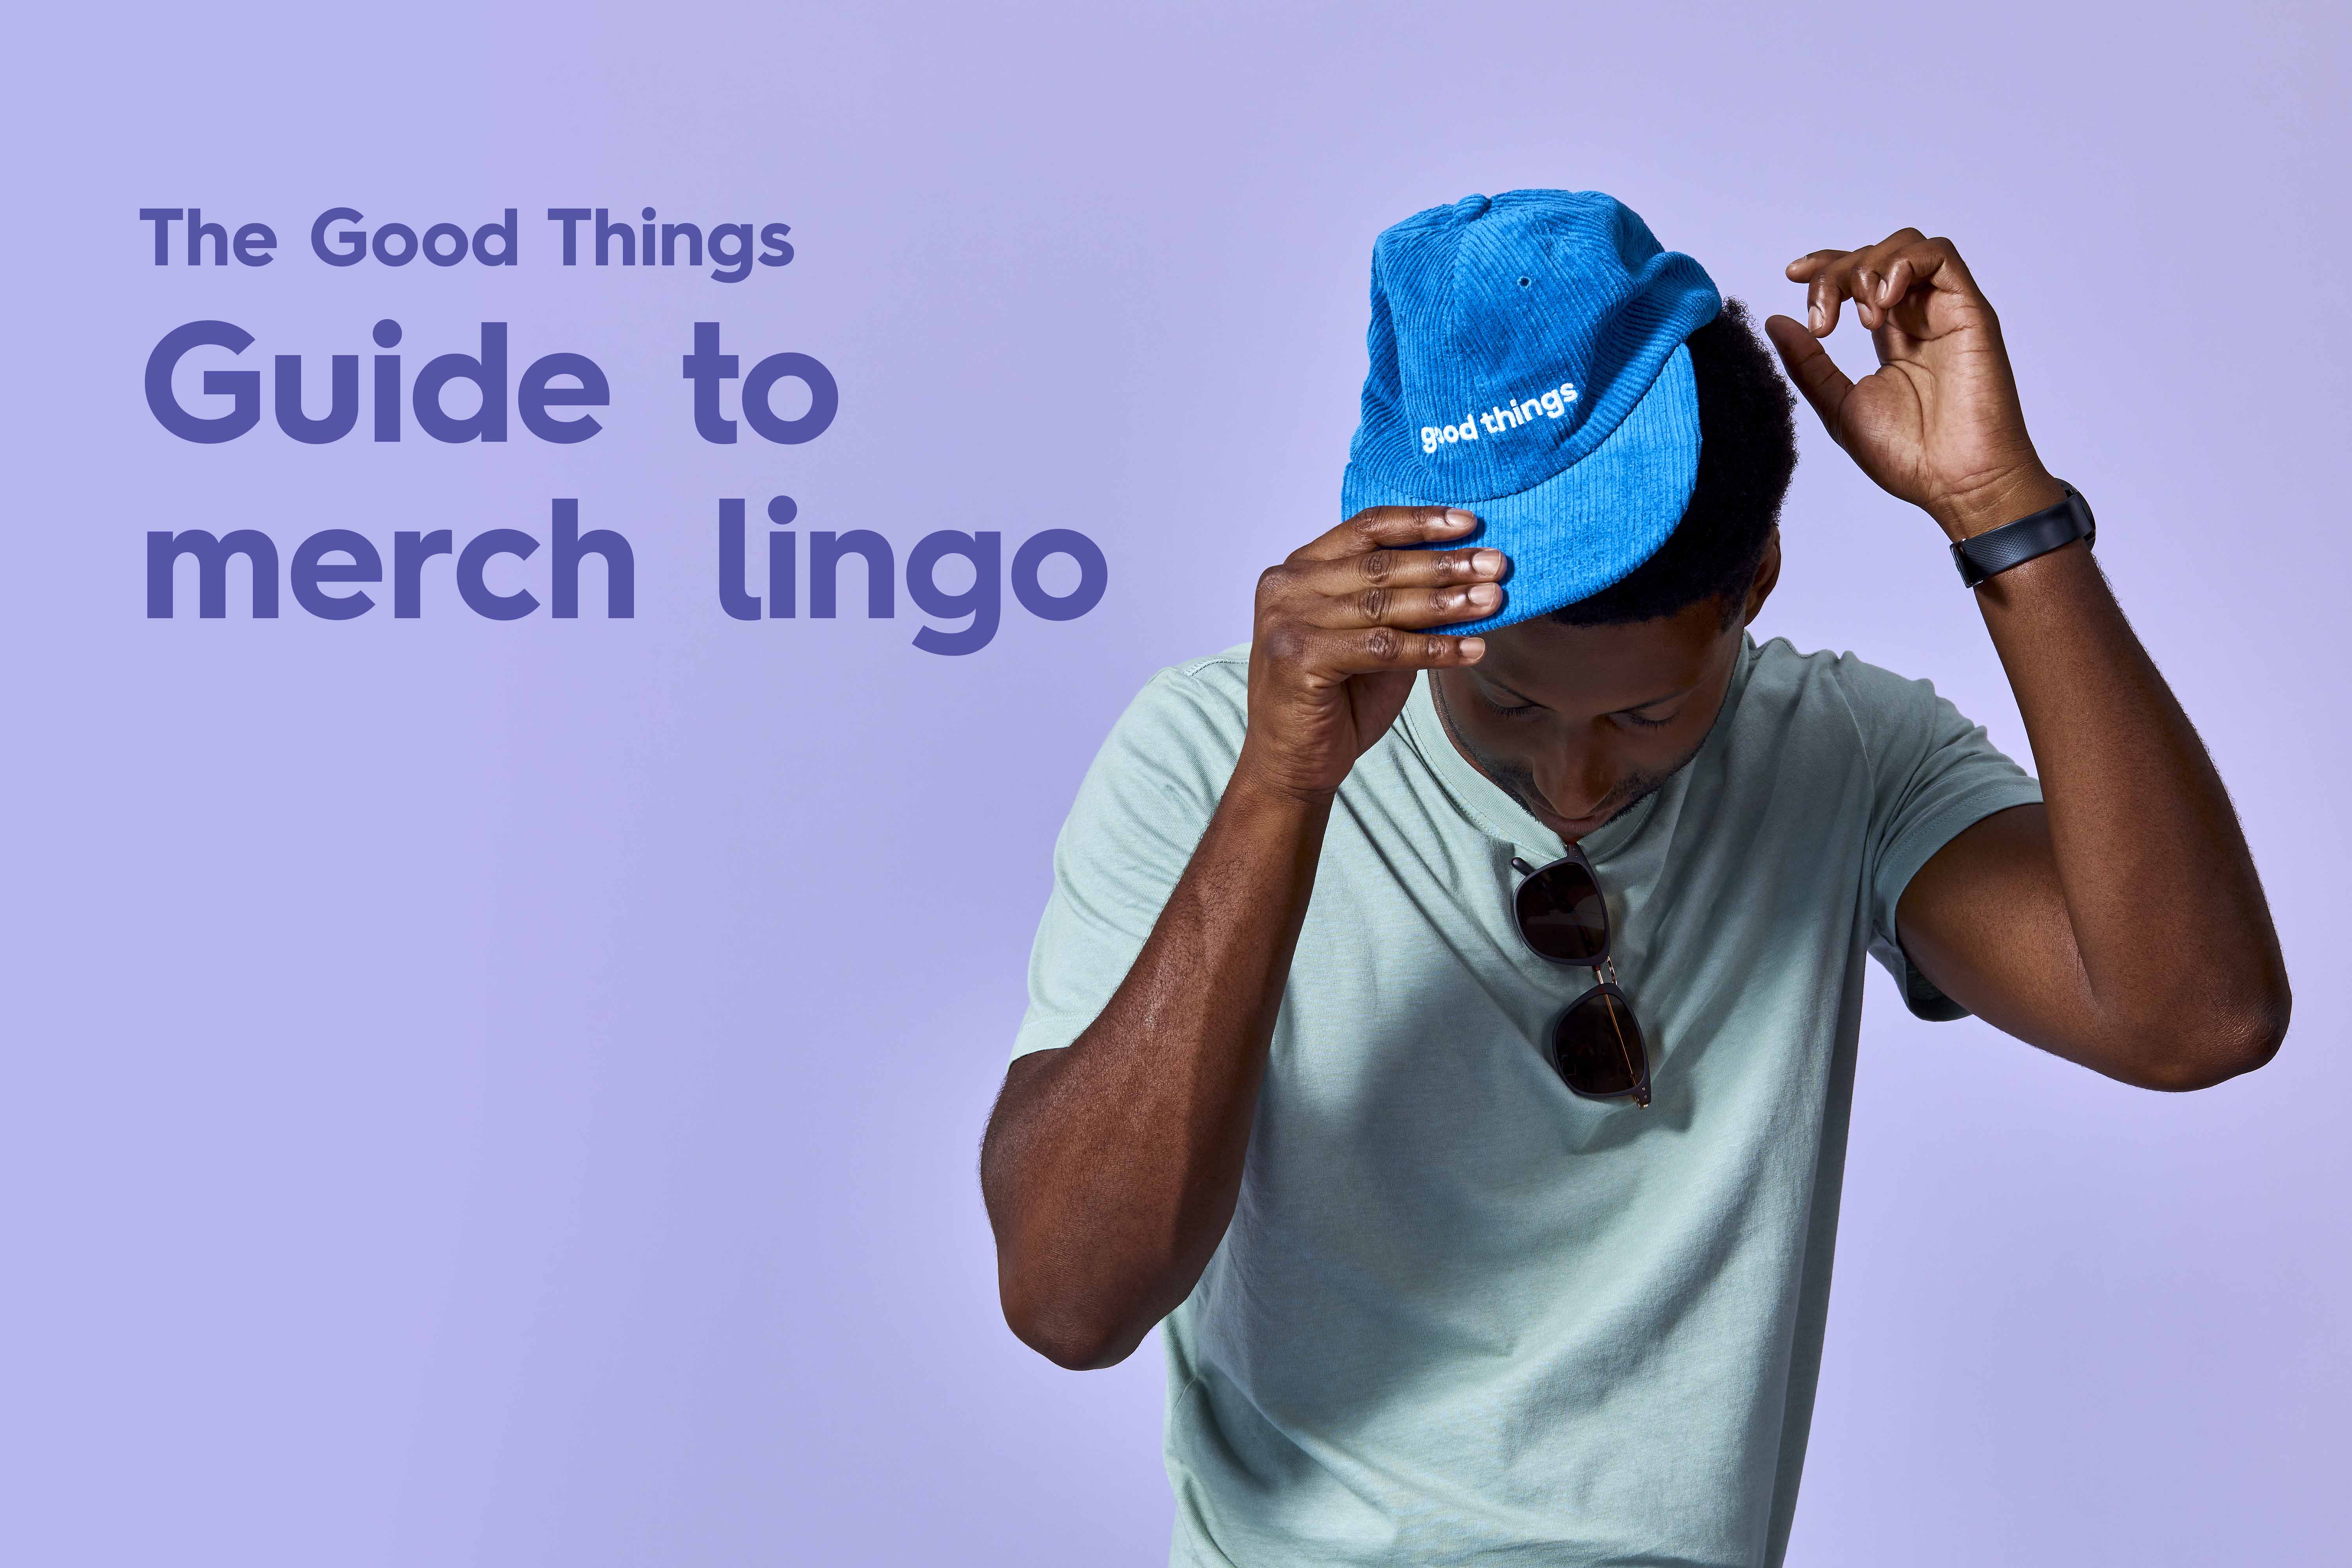 The Good Things Guide to Merchandise Lingo